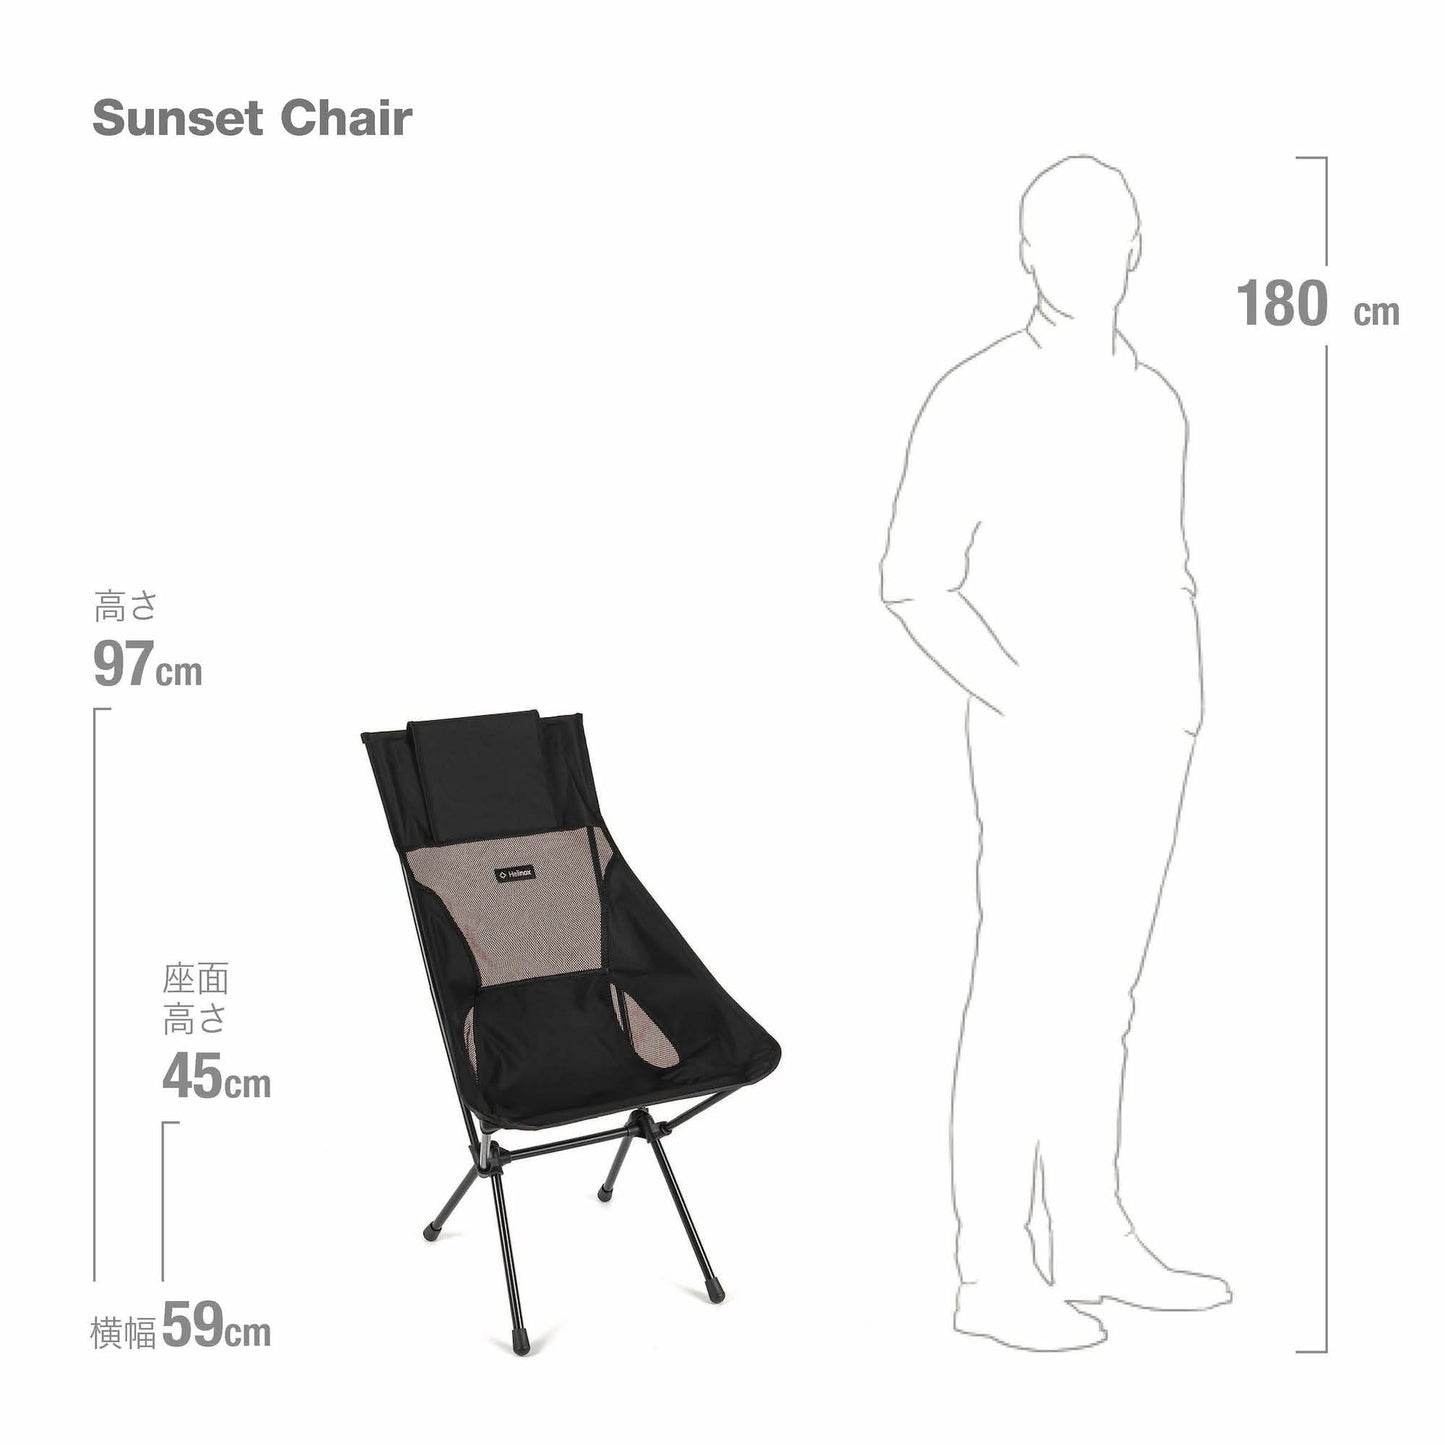 Sunset Chair - All Black